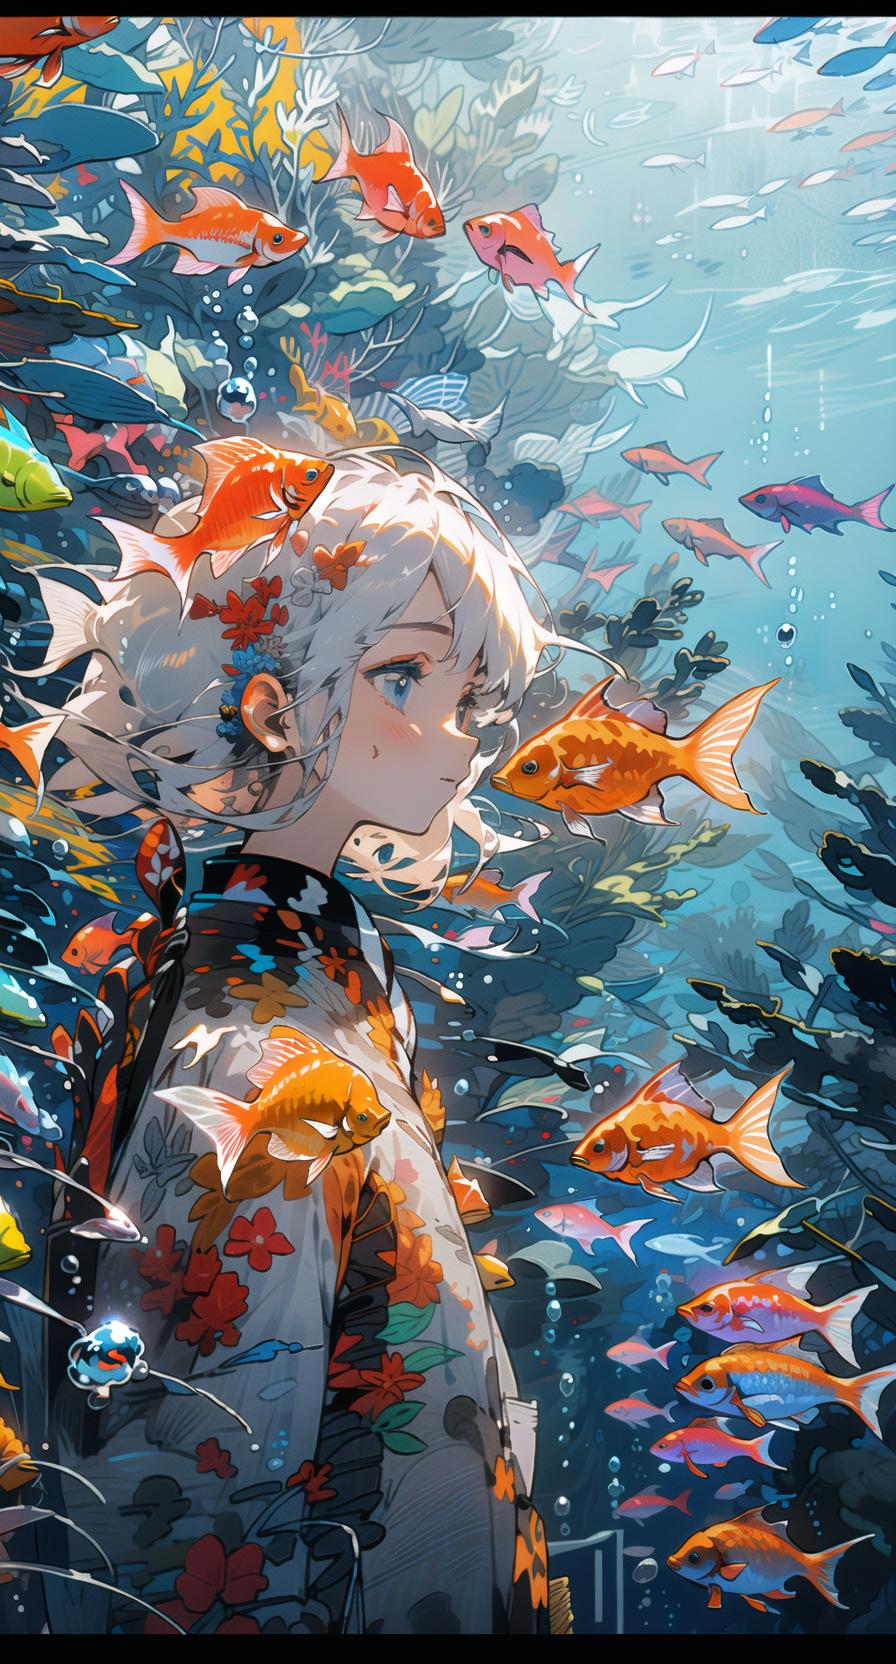 A young girl surrounded by a sea of colorful fish, including goldfish and koi, in a vibrant underwater scene.